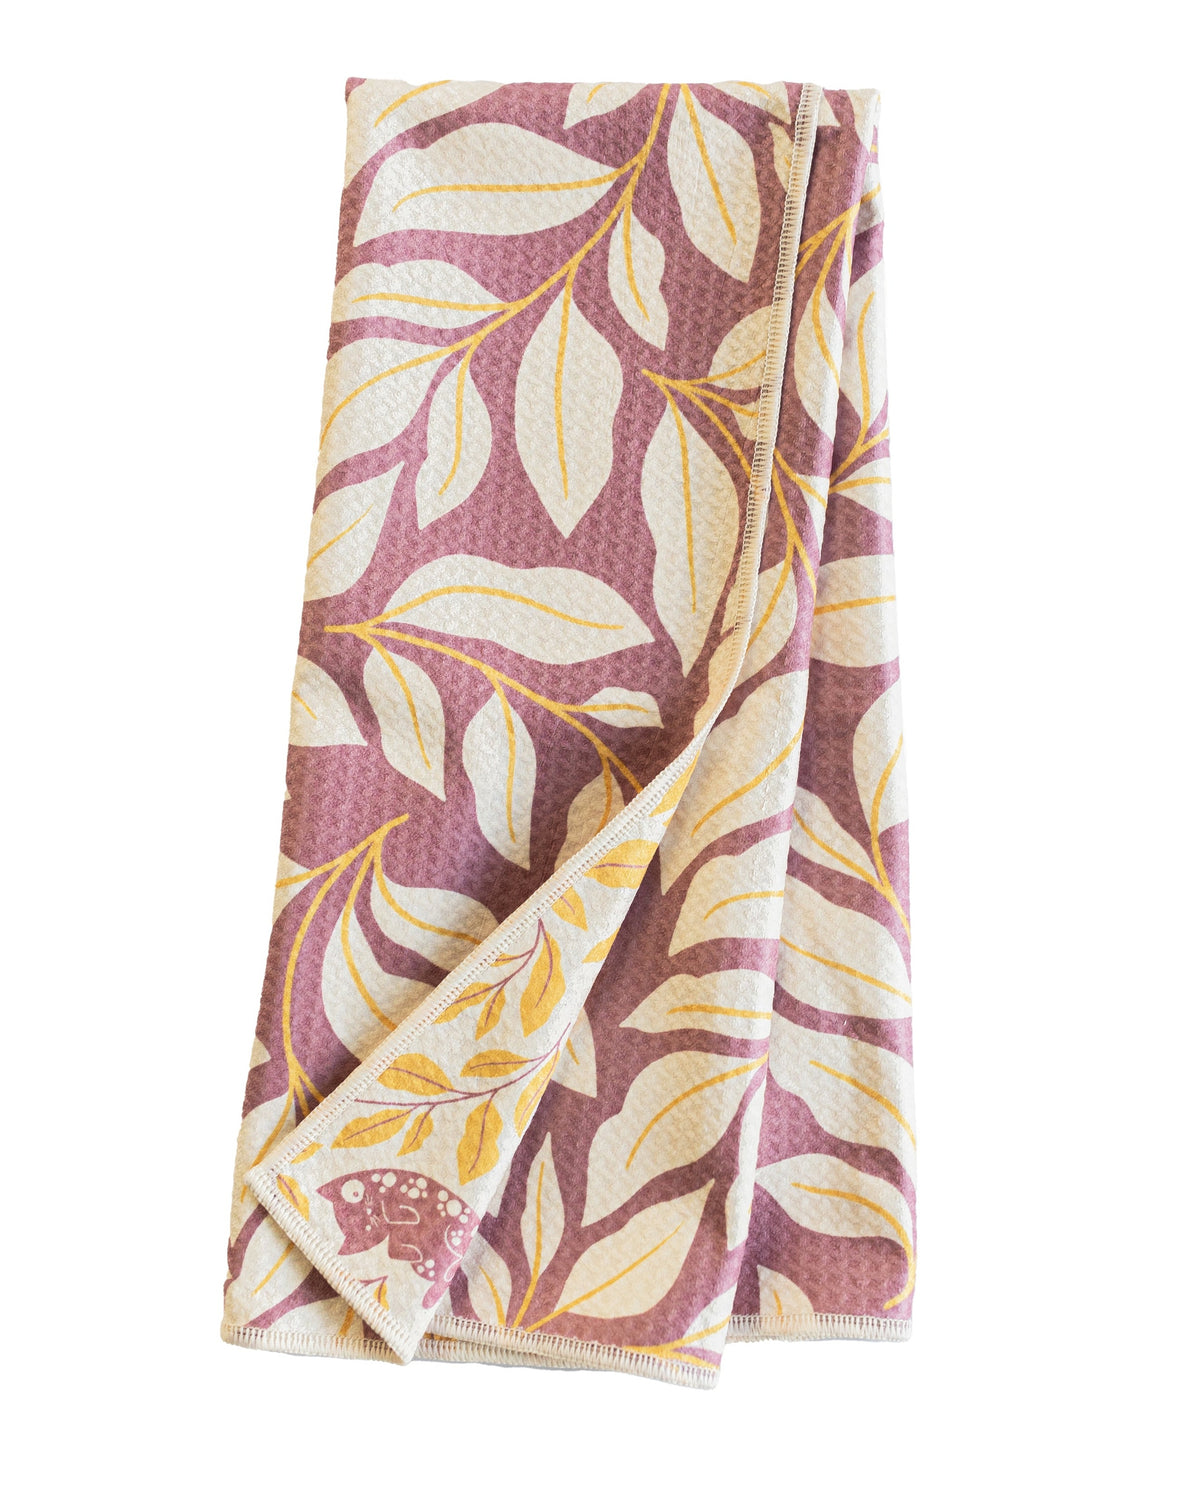 Anywhere Towel - Nuthatch Cat Club Kitchen Towels Once Again Home Co.   